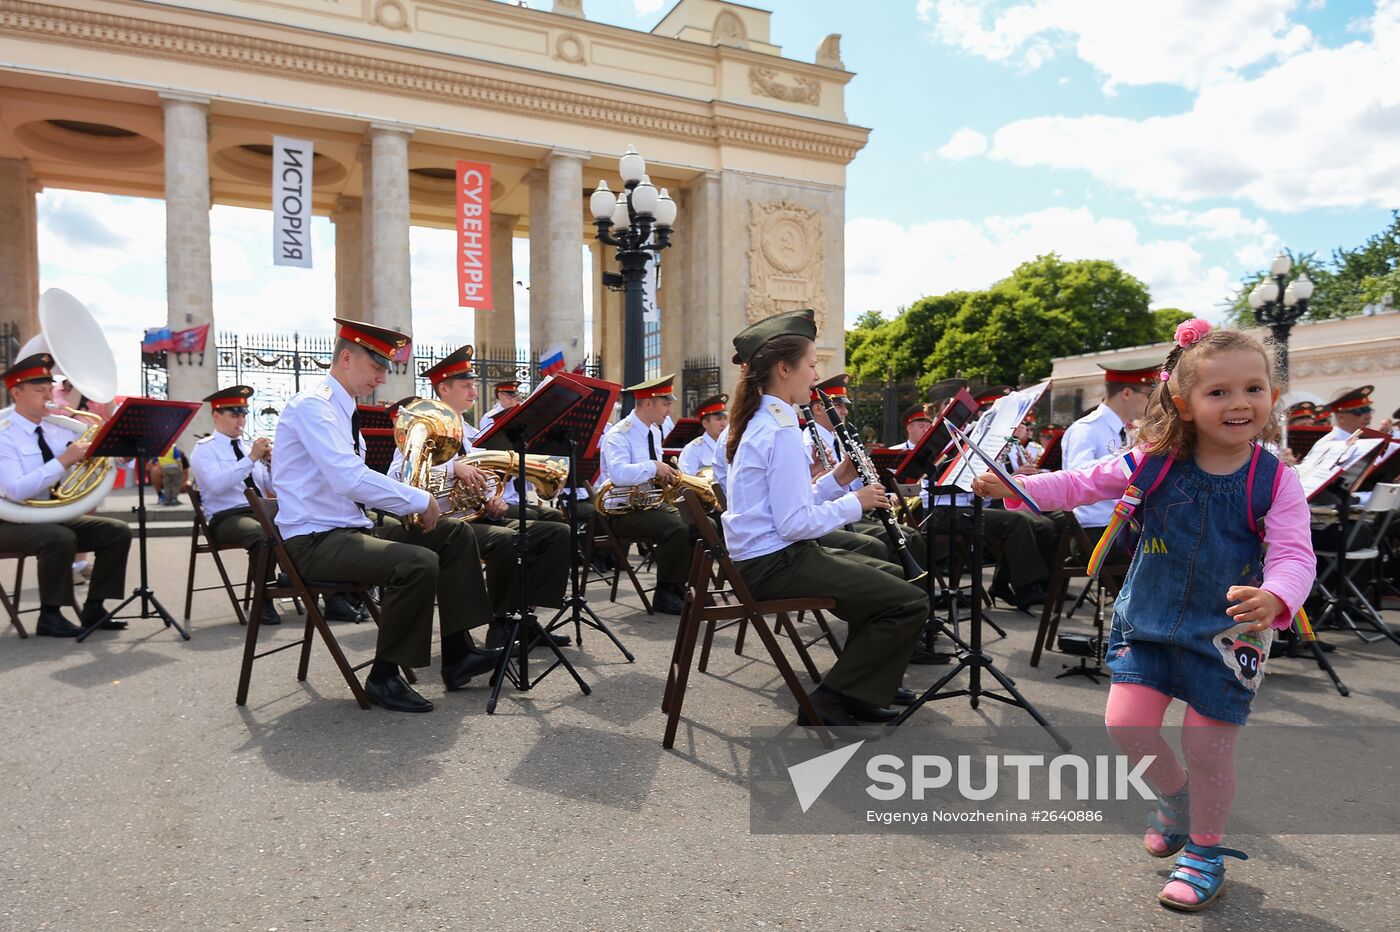 Russia Day celebrations in Moscow